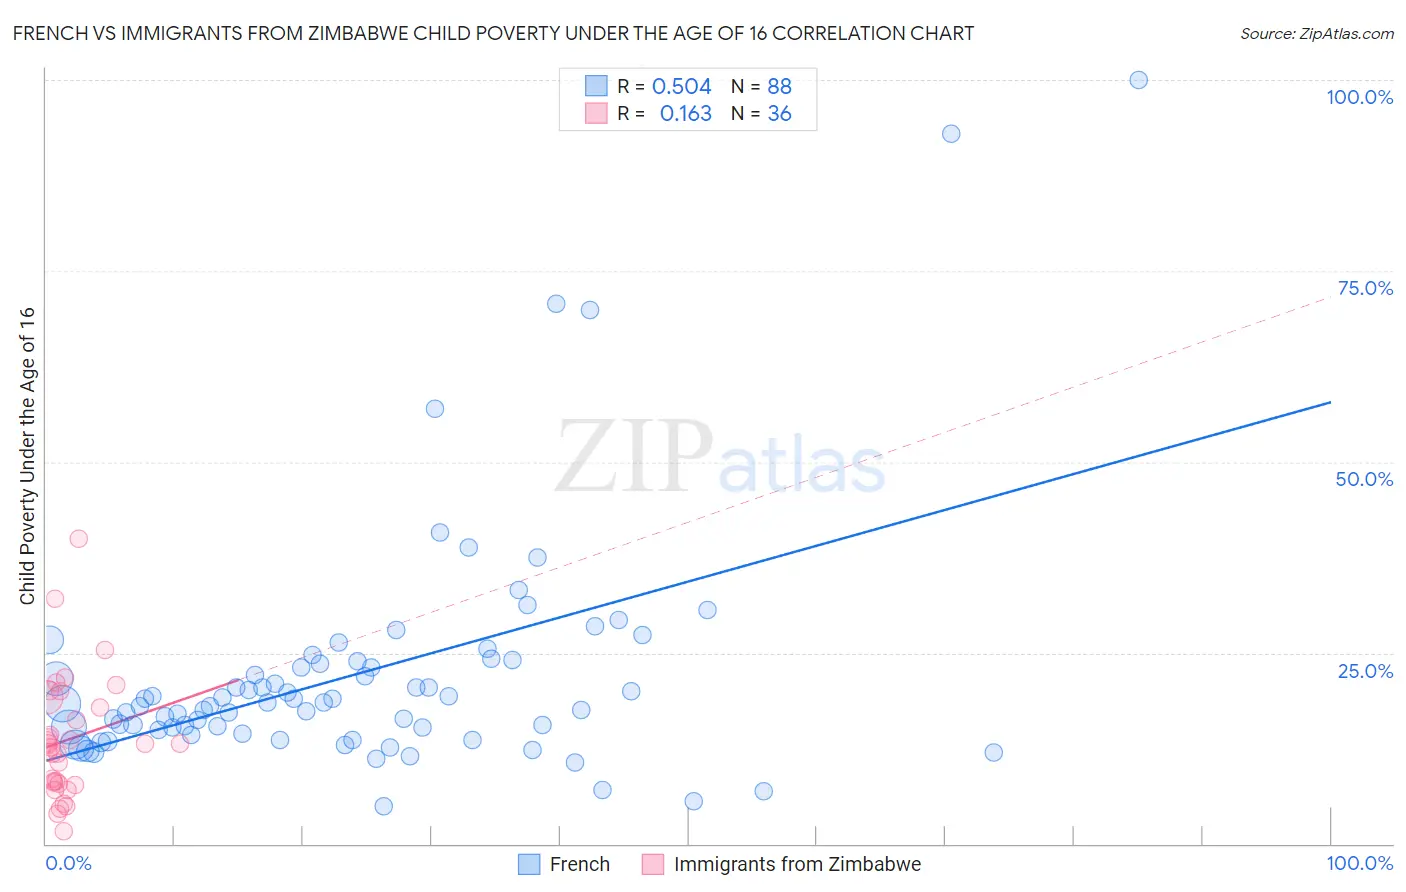 French vs Immigrants from Zimbabwe Child Poverty Under the Age of 16